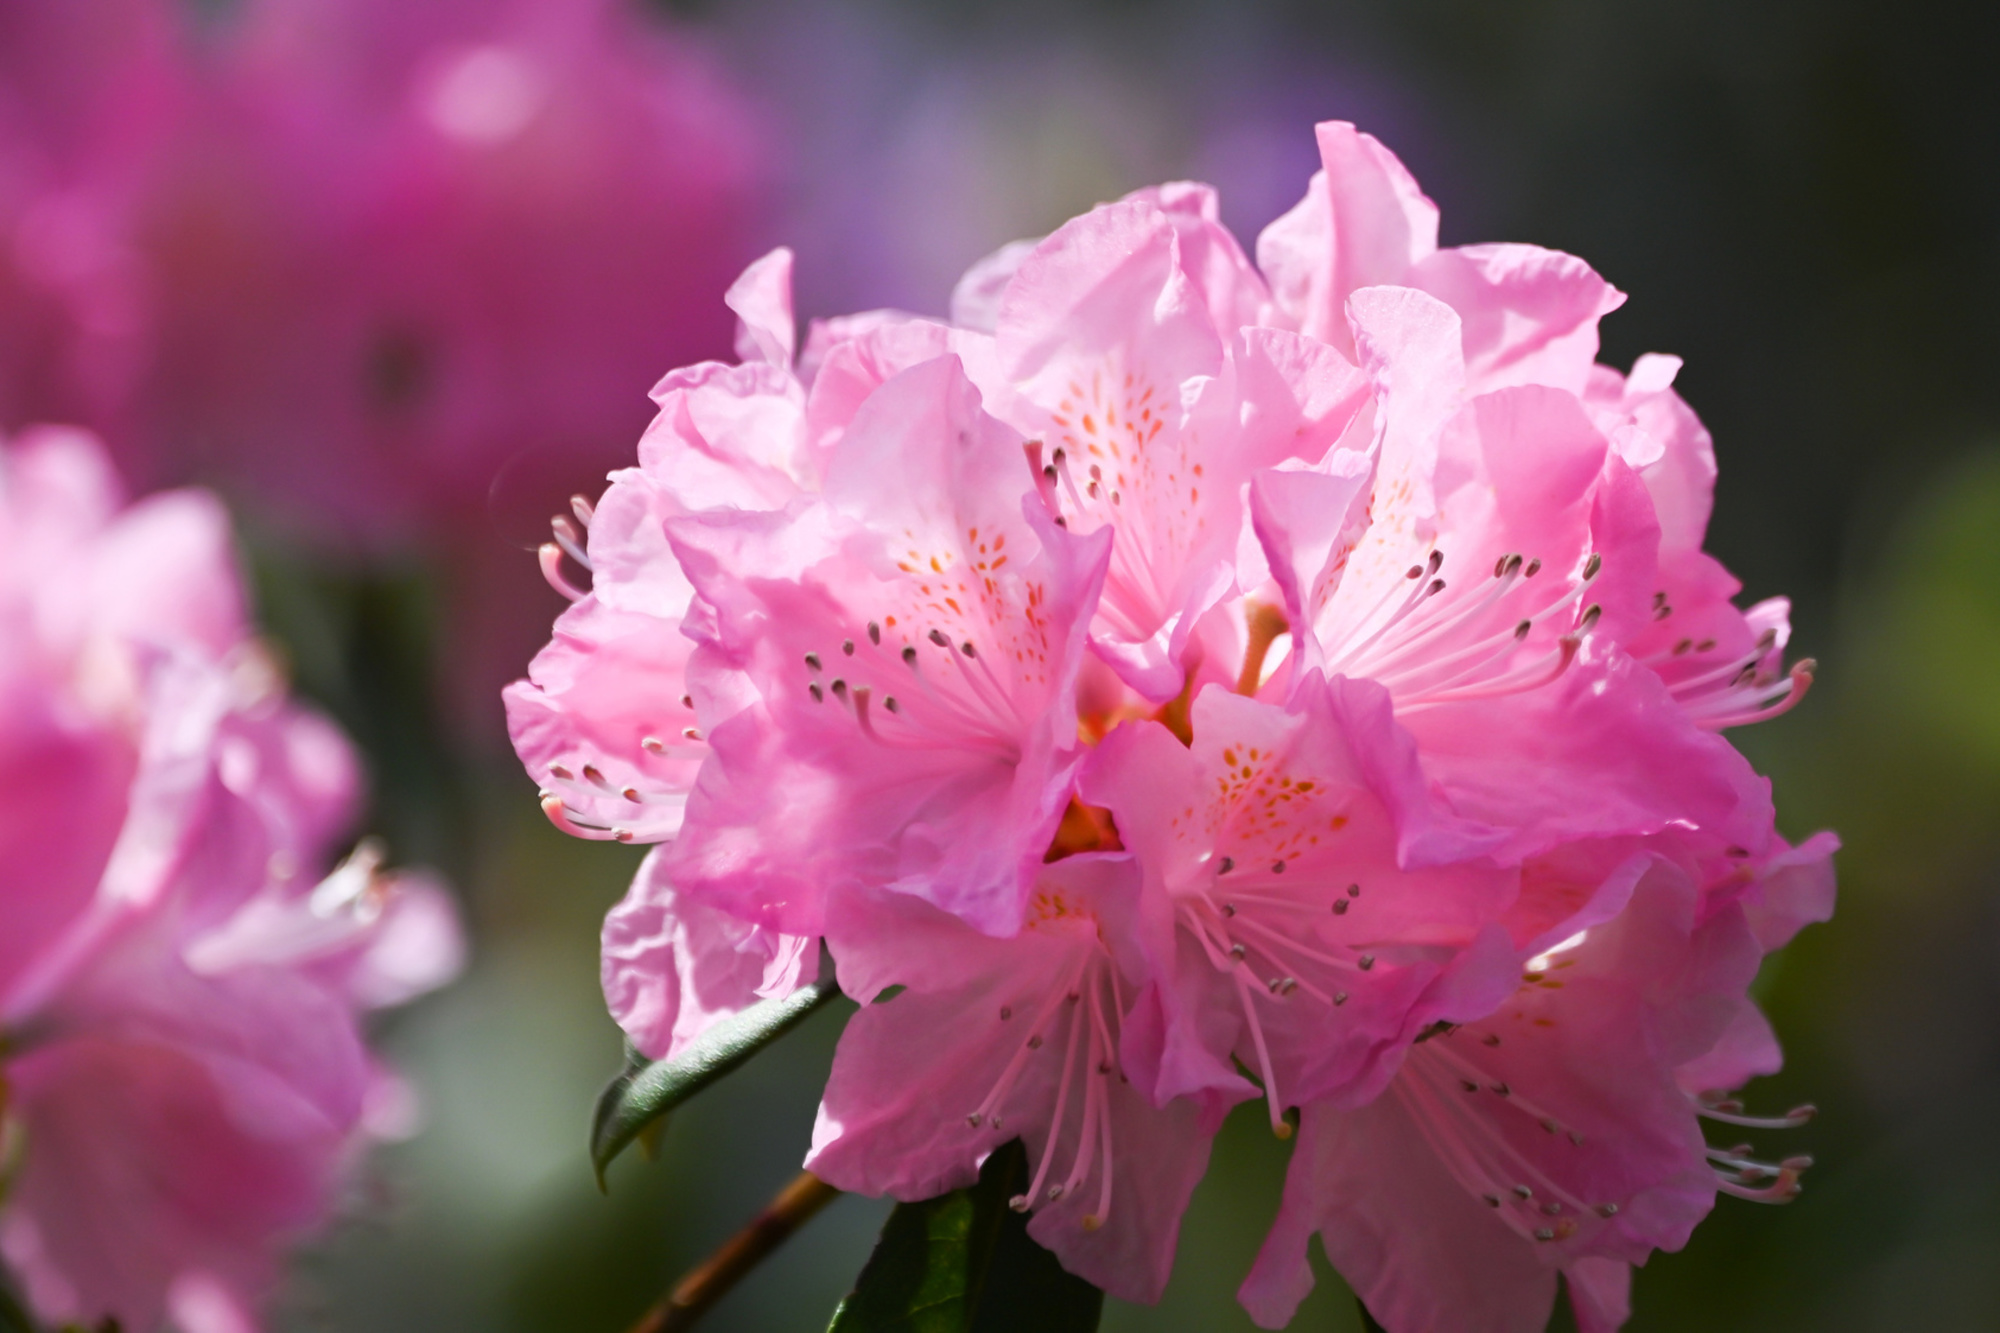 rhododendron, iStock